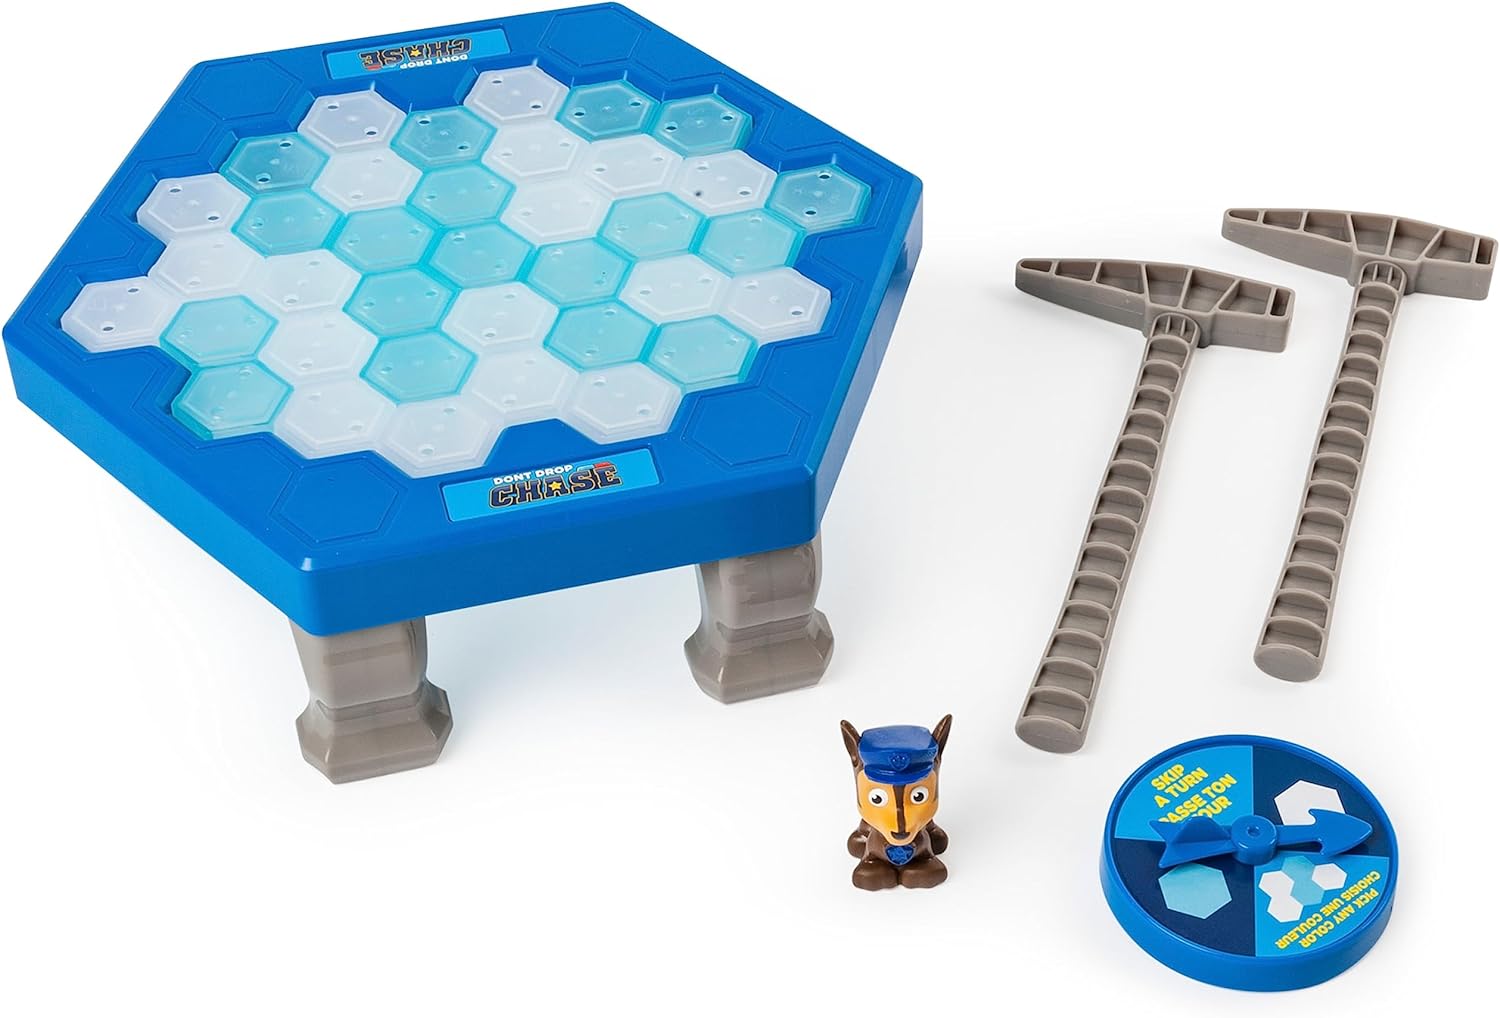 Spin Master Paw Patrol - Rescue Chase Board Game